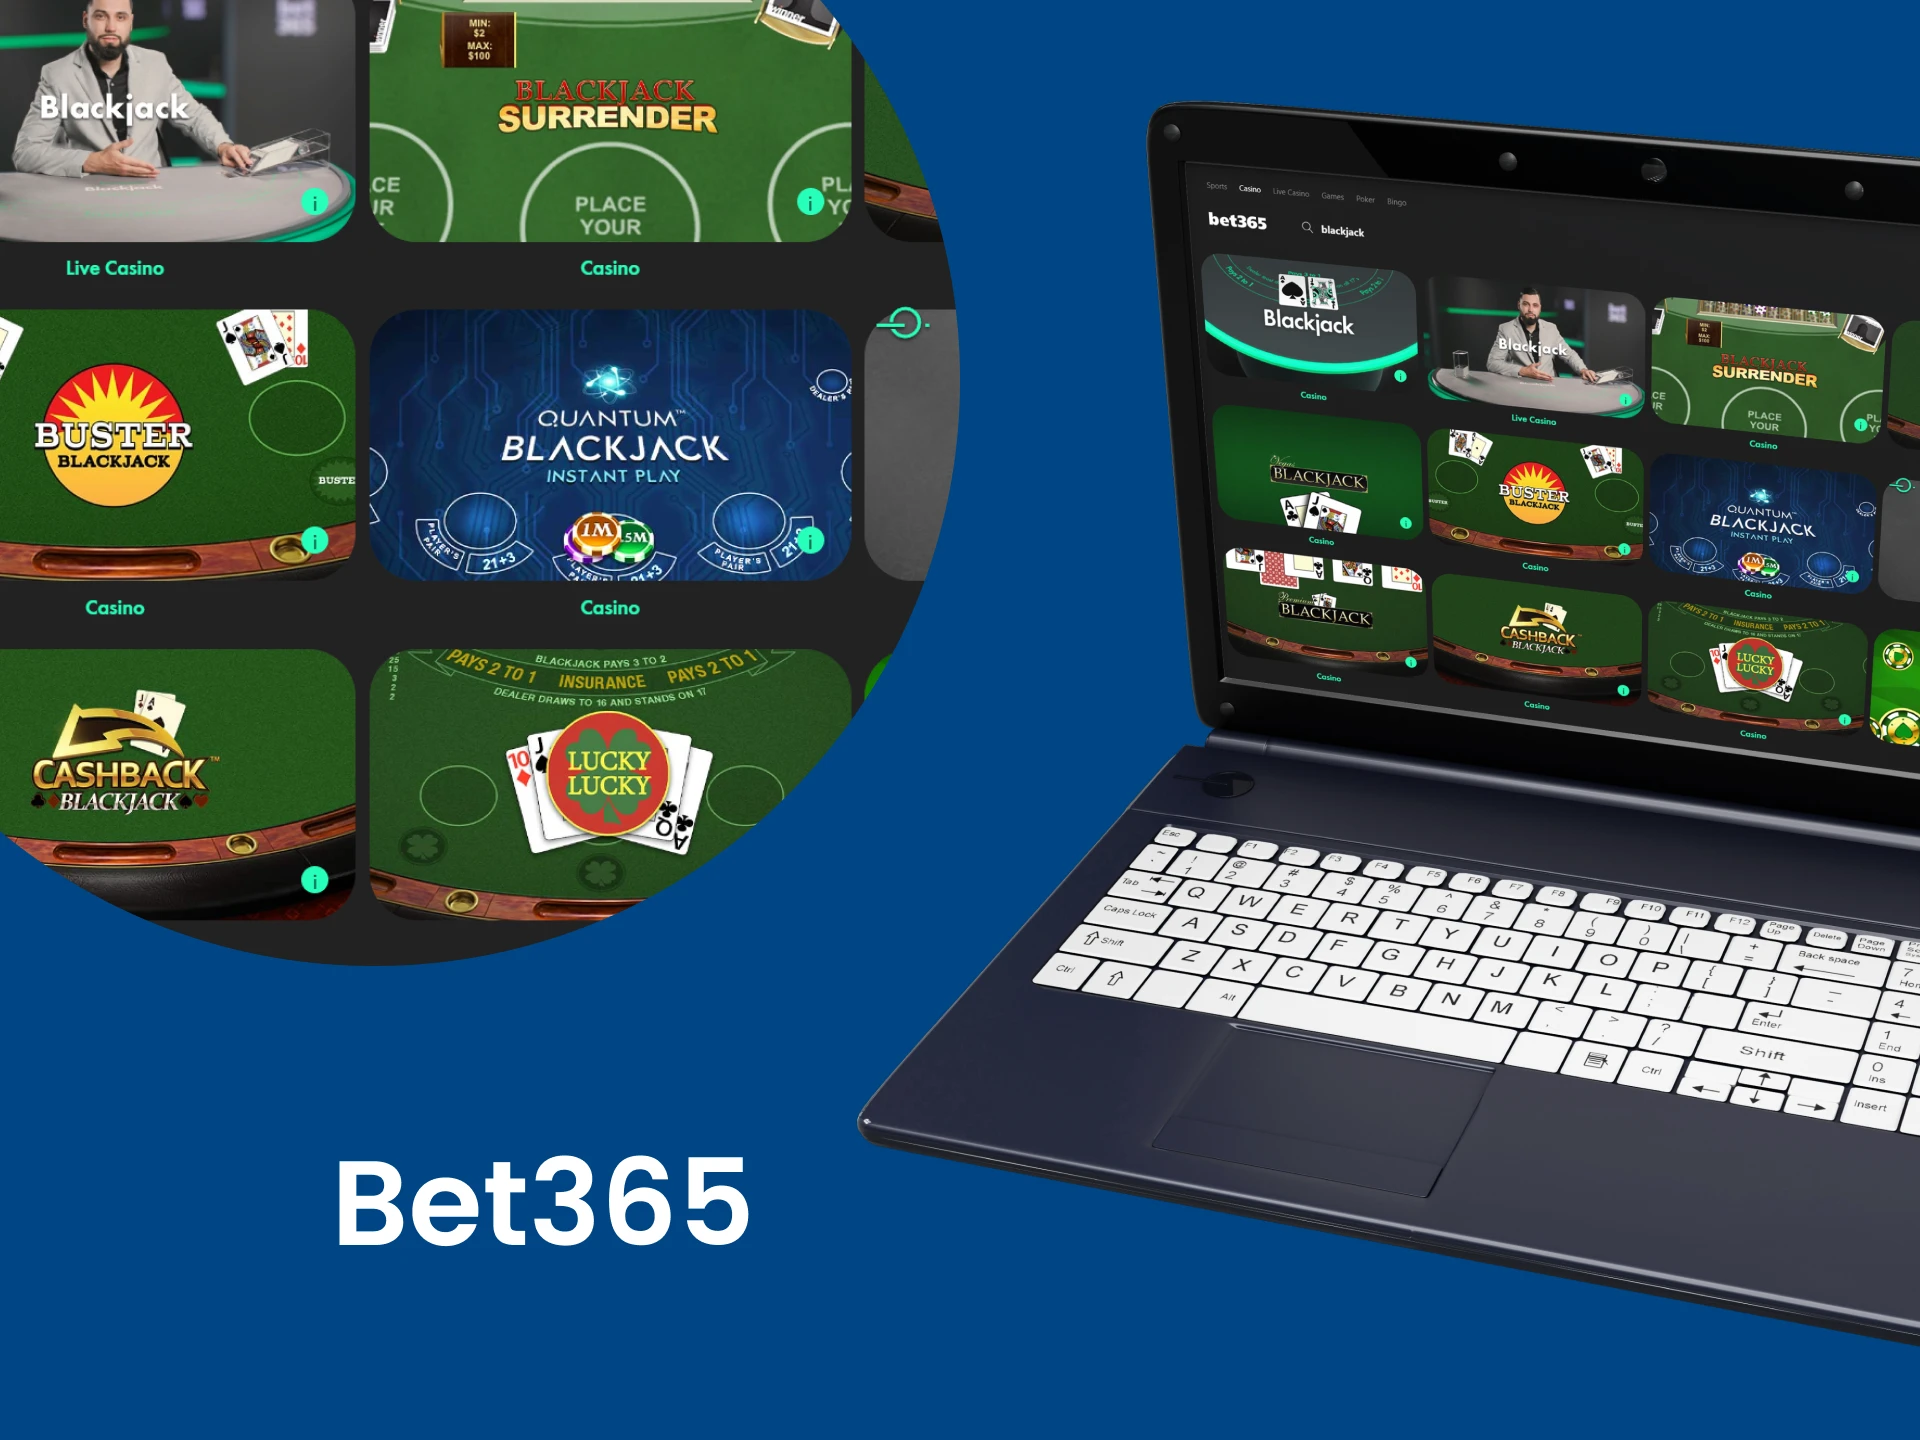 Choose from different types of table blackjack games at Bet365.